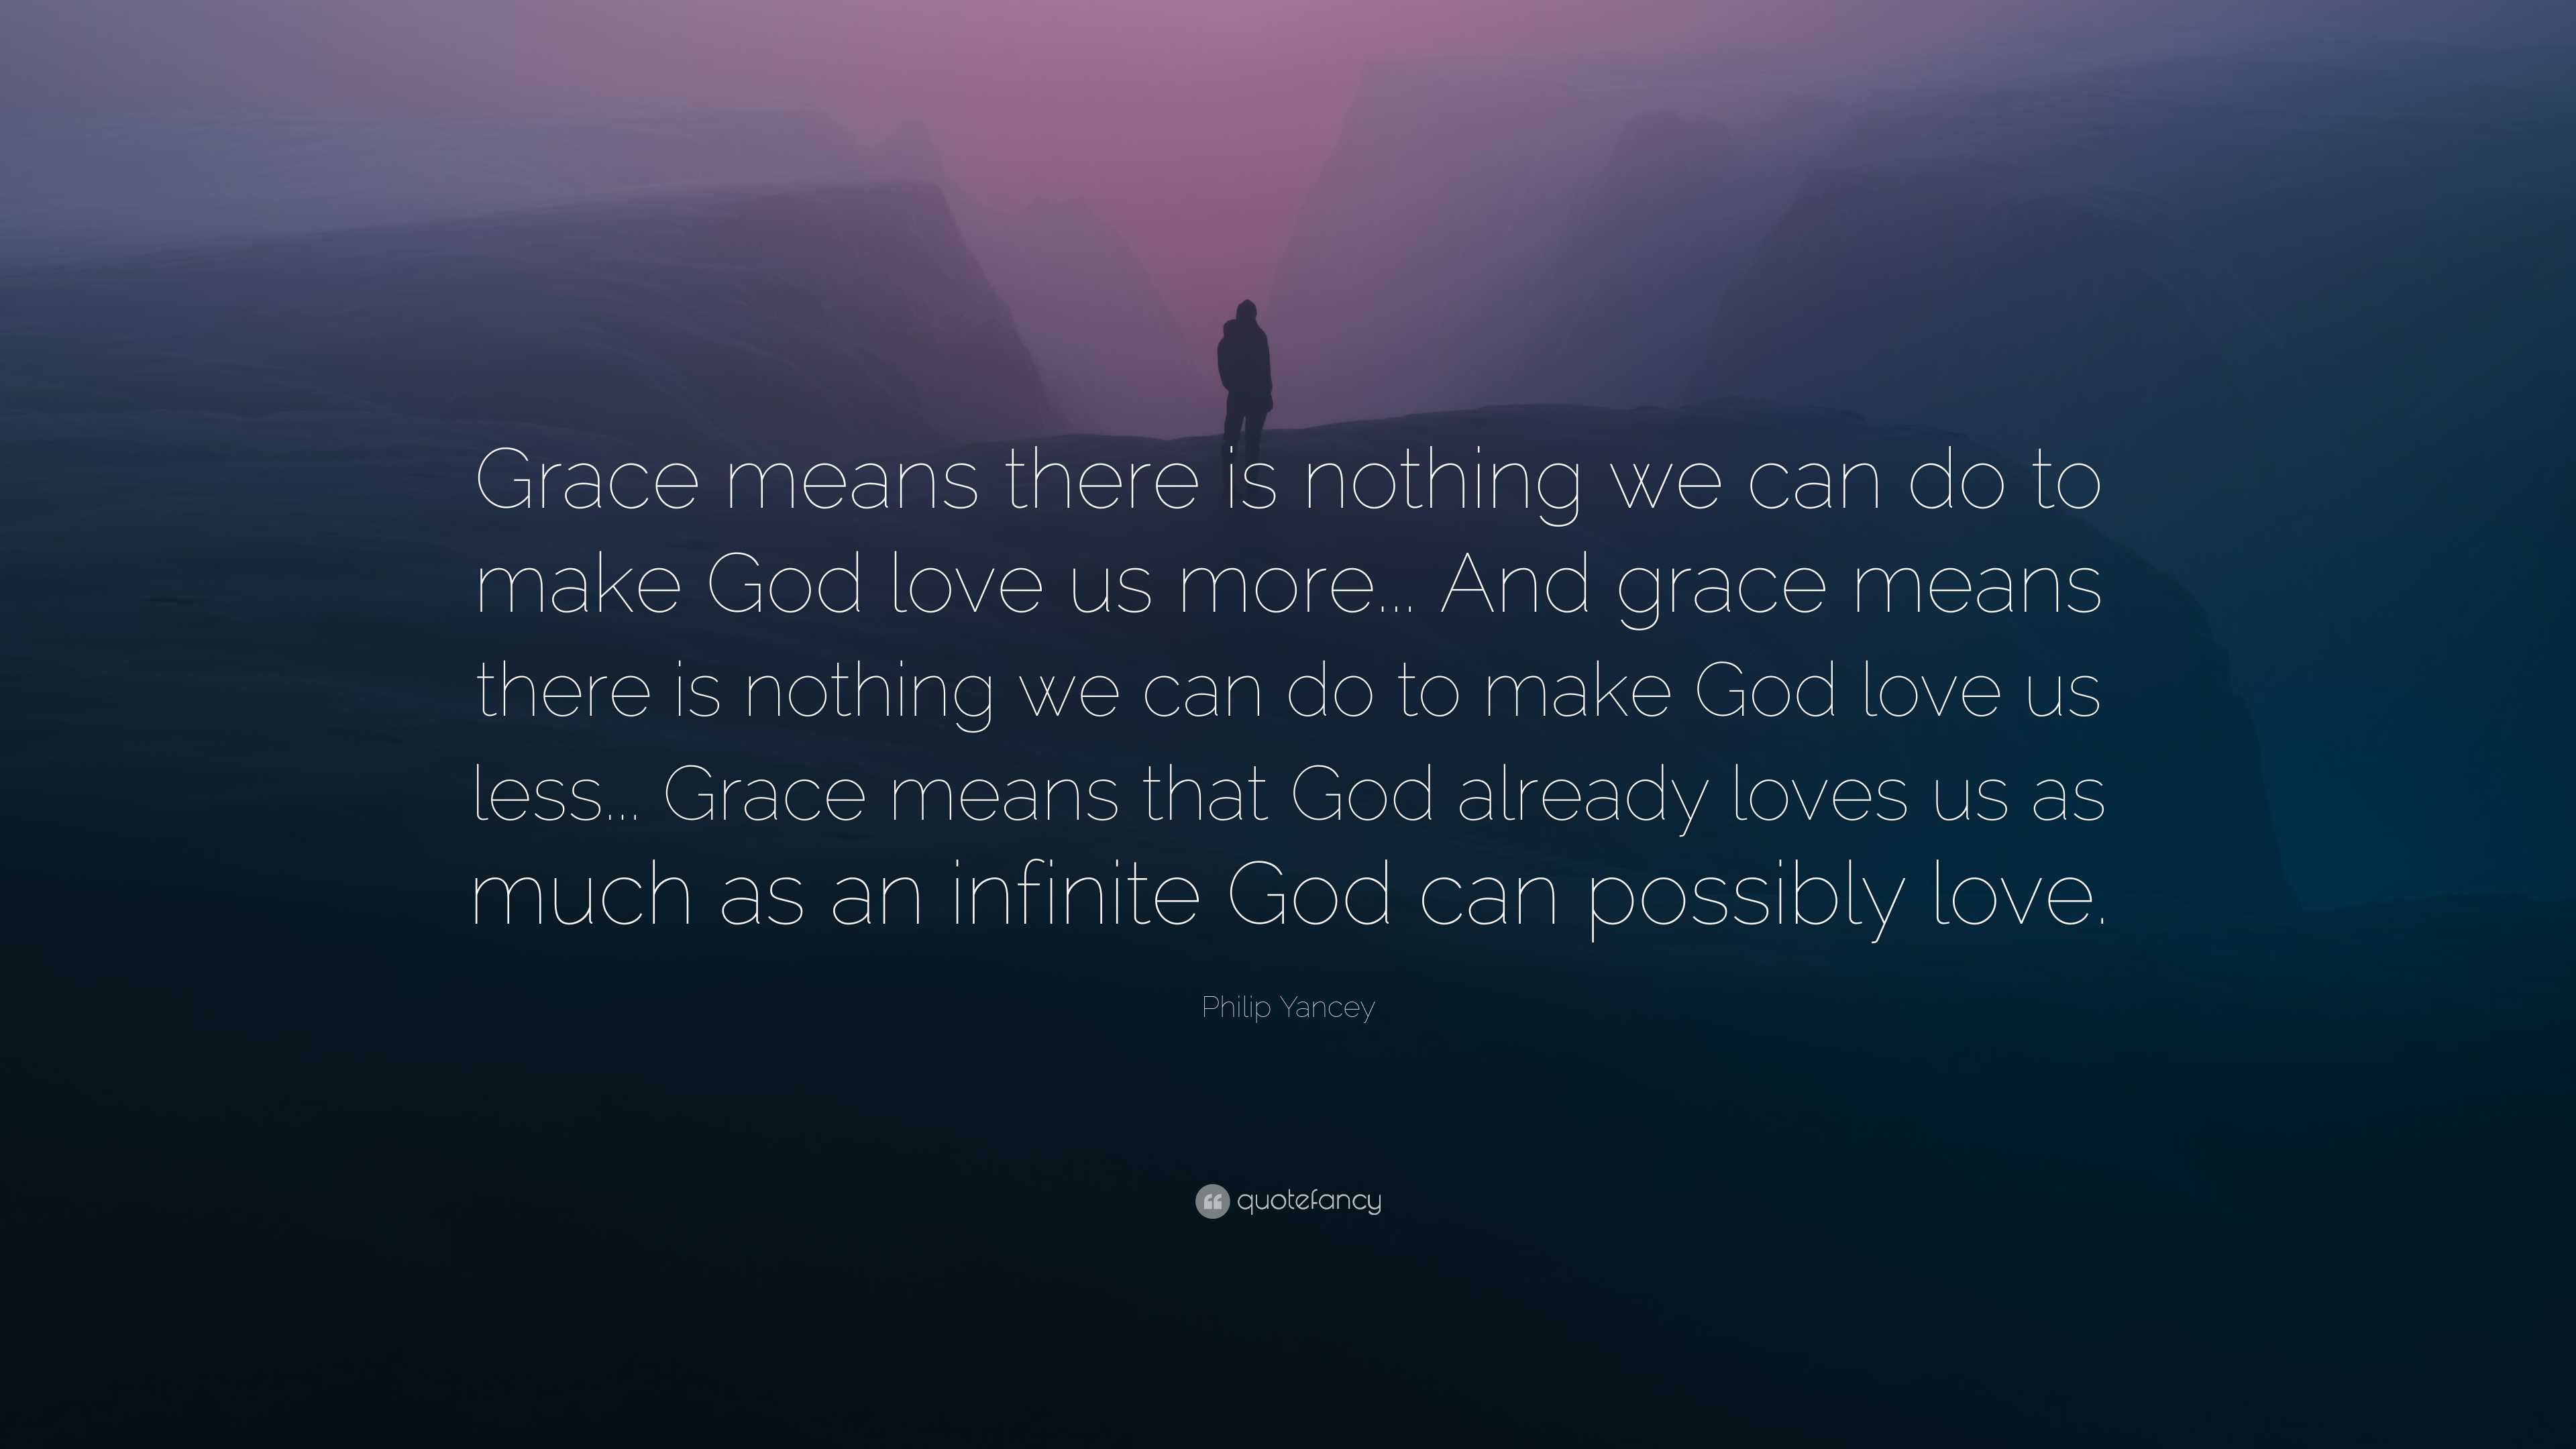 By His Grace: Nothing compares to God's love